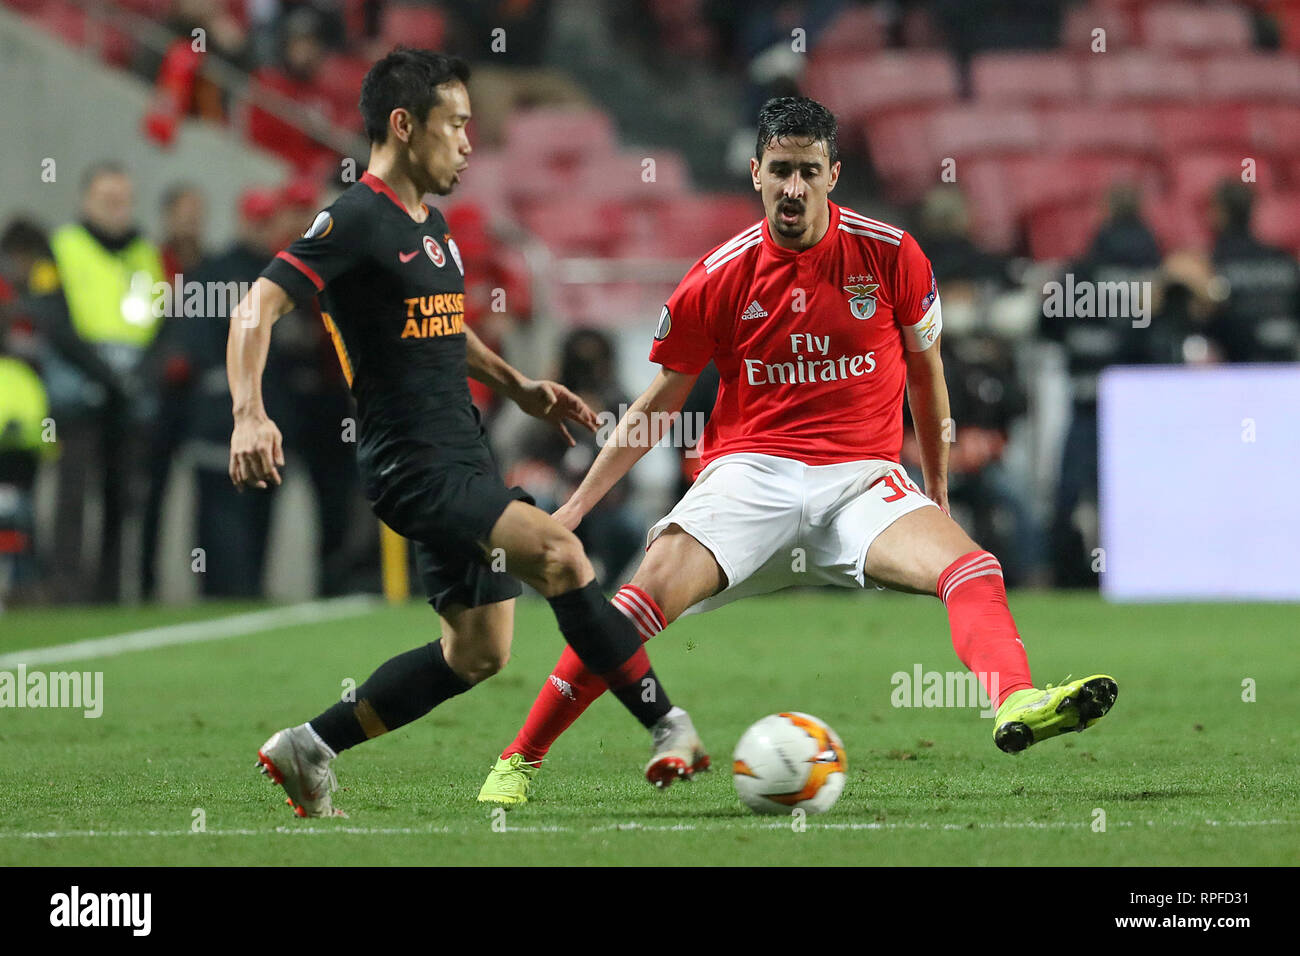 Yuto Nagatomo of Galatasaray AS (L) vies for the ball with André Almeida of SL Benfica (R) during the Europa League 2018/2019 footballl match between SL Benfica vs Galatasaray AS.  (Final score: SL Benfica 0 - 0 Galatasaray AS) Stock Photo